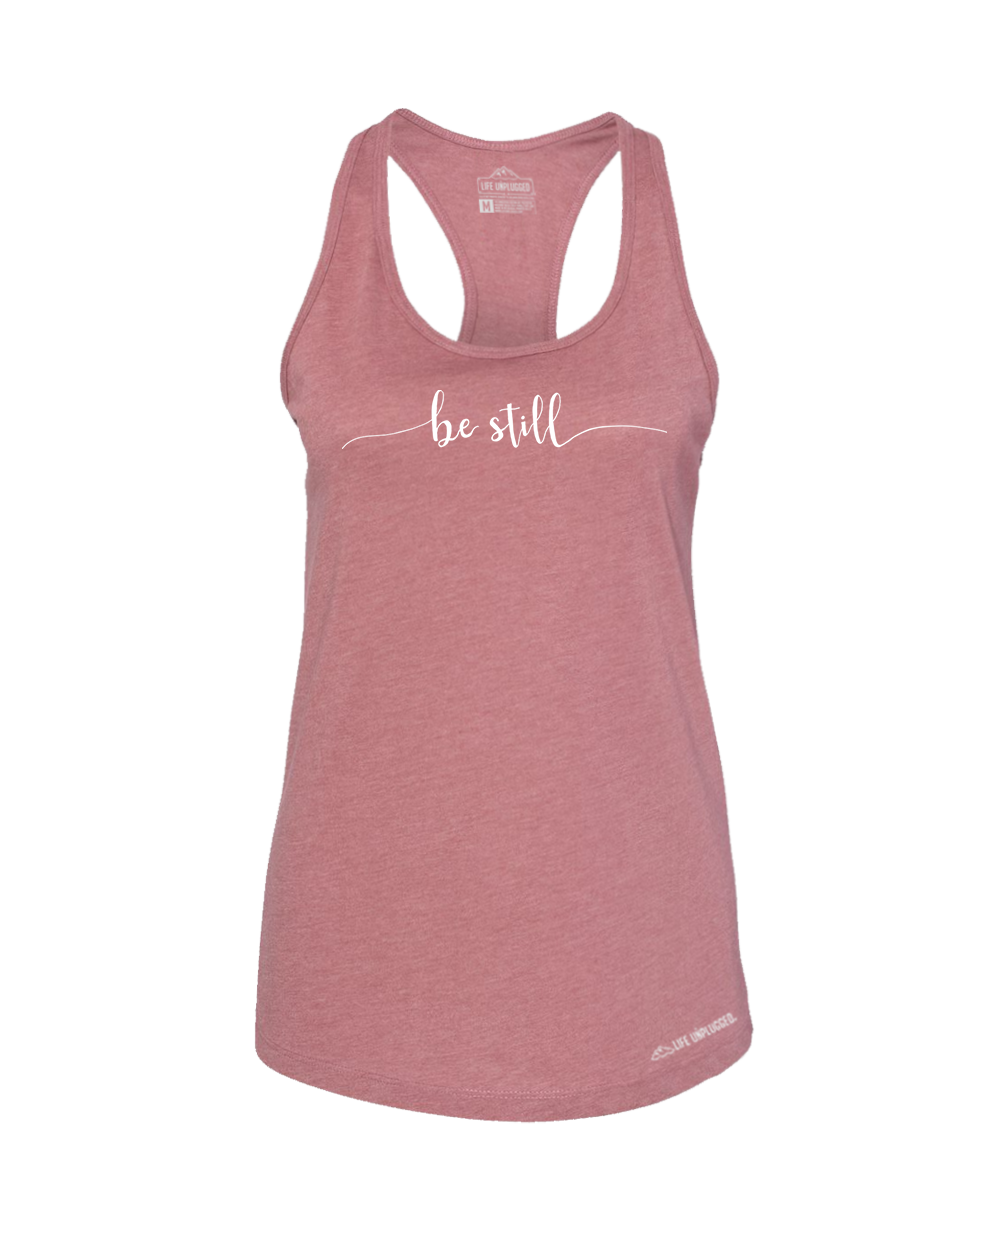 Be Still Premium Women's Relaxed Fit Racerback Tank Top - Life Unplugged